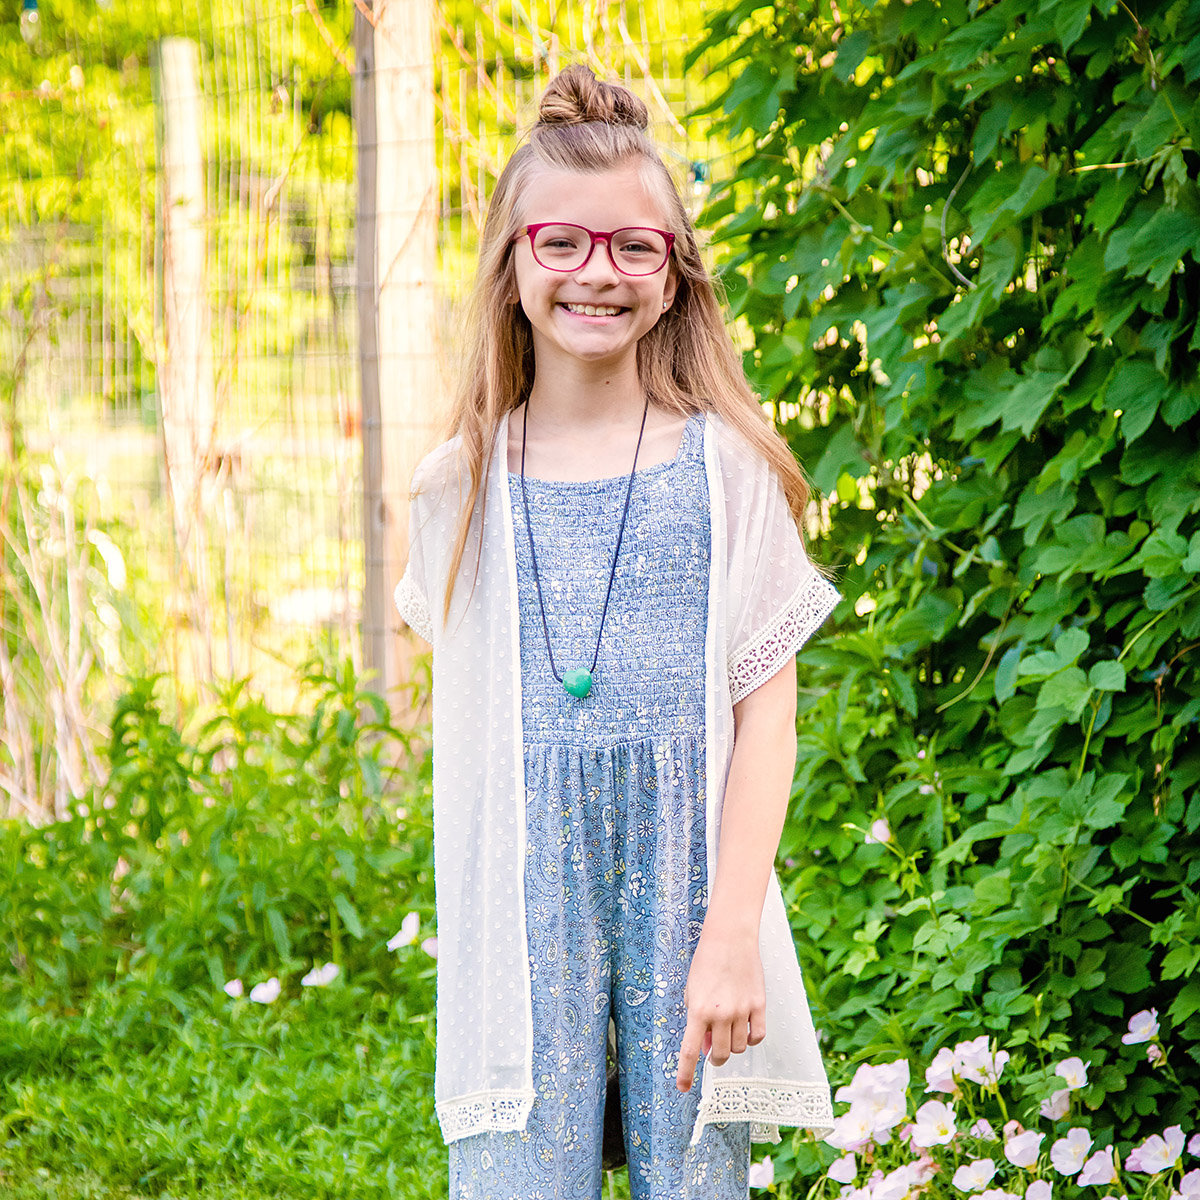 17 Cute & Trendy Summer Styles For Kids